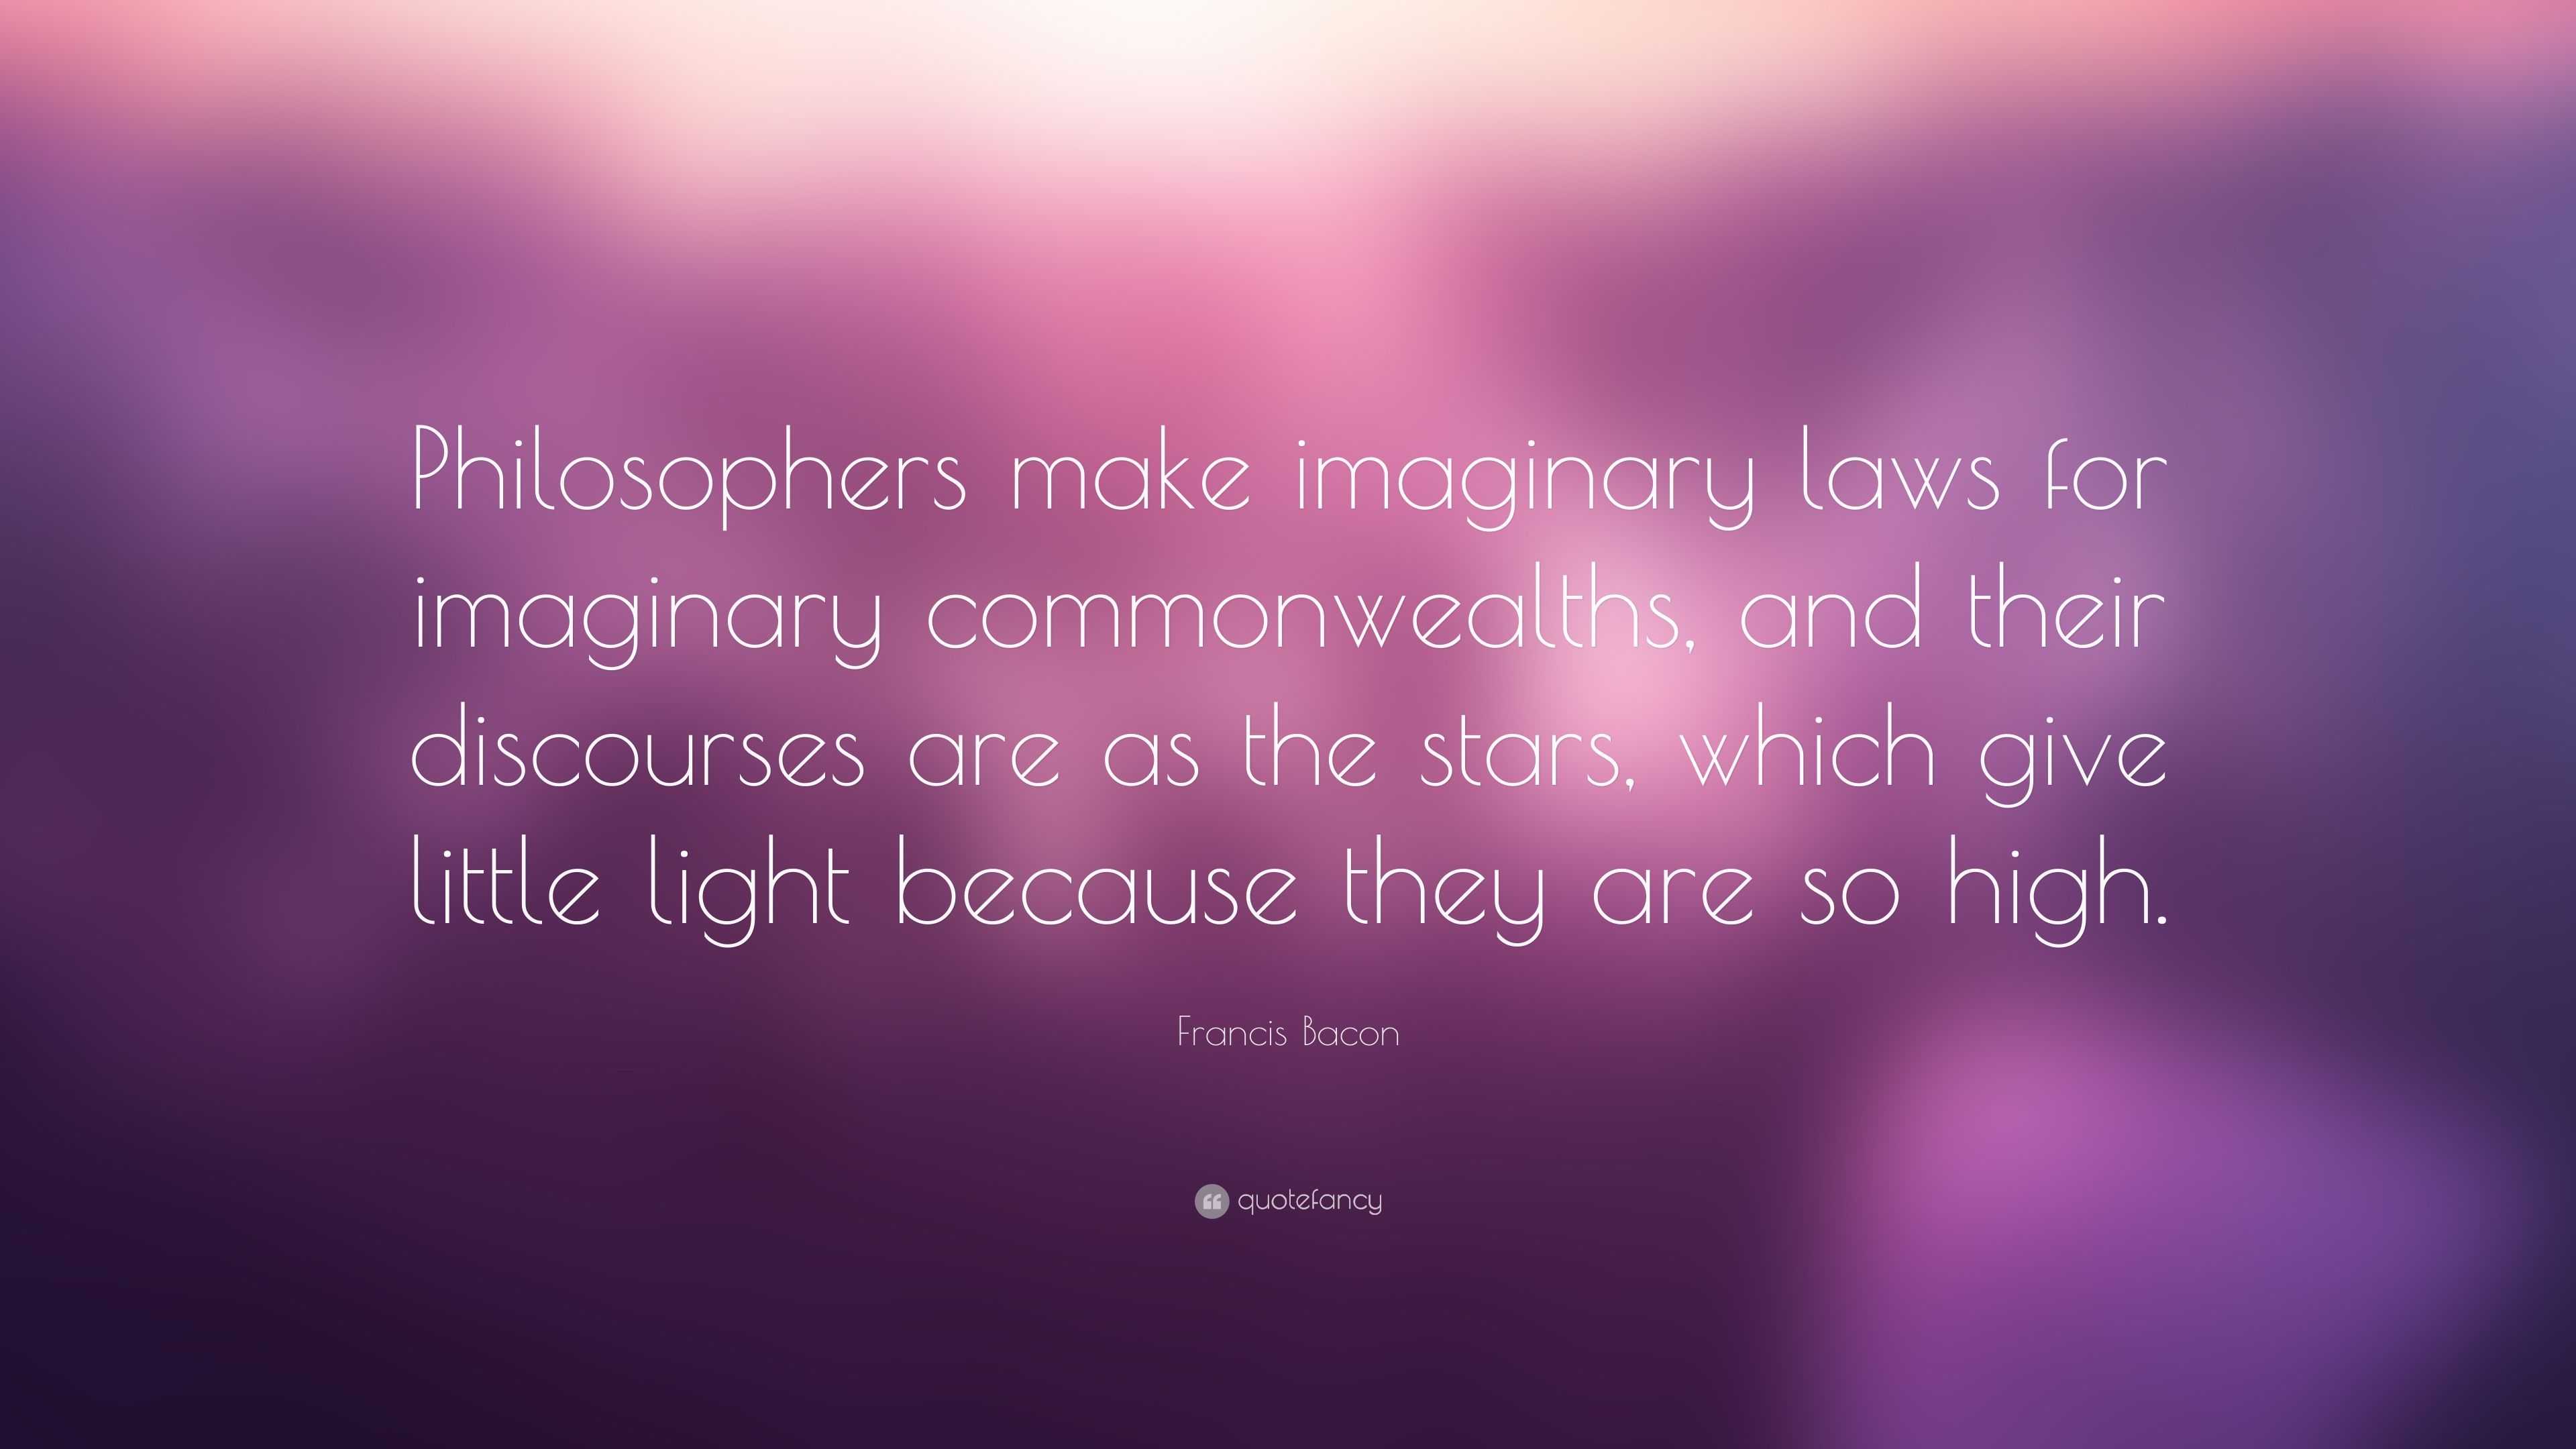 Francis Bacon Quote “philosophers Make Imaginary Laws For Imaginary Commonwealths And Their